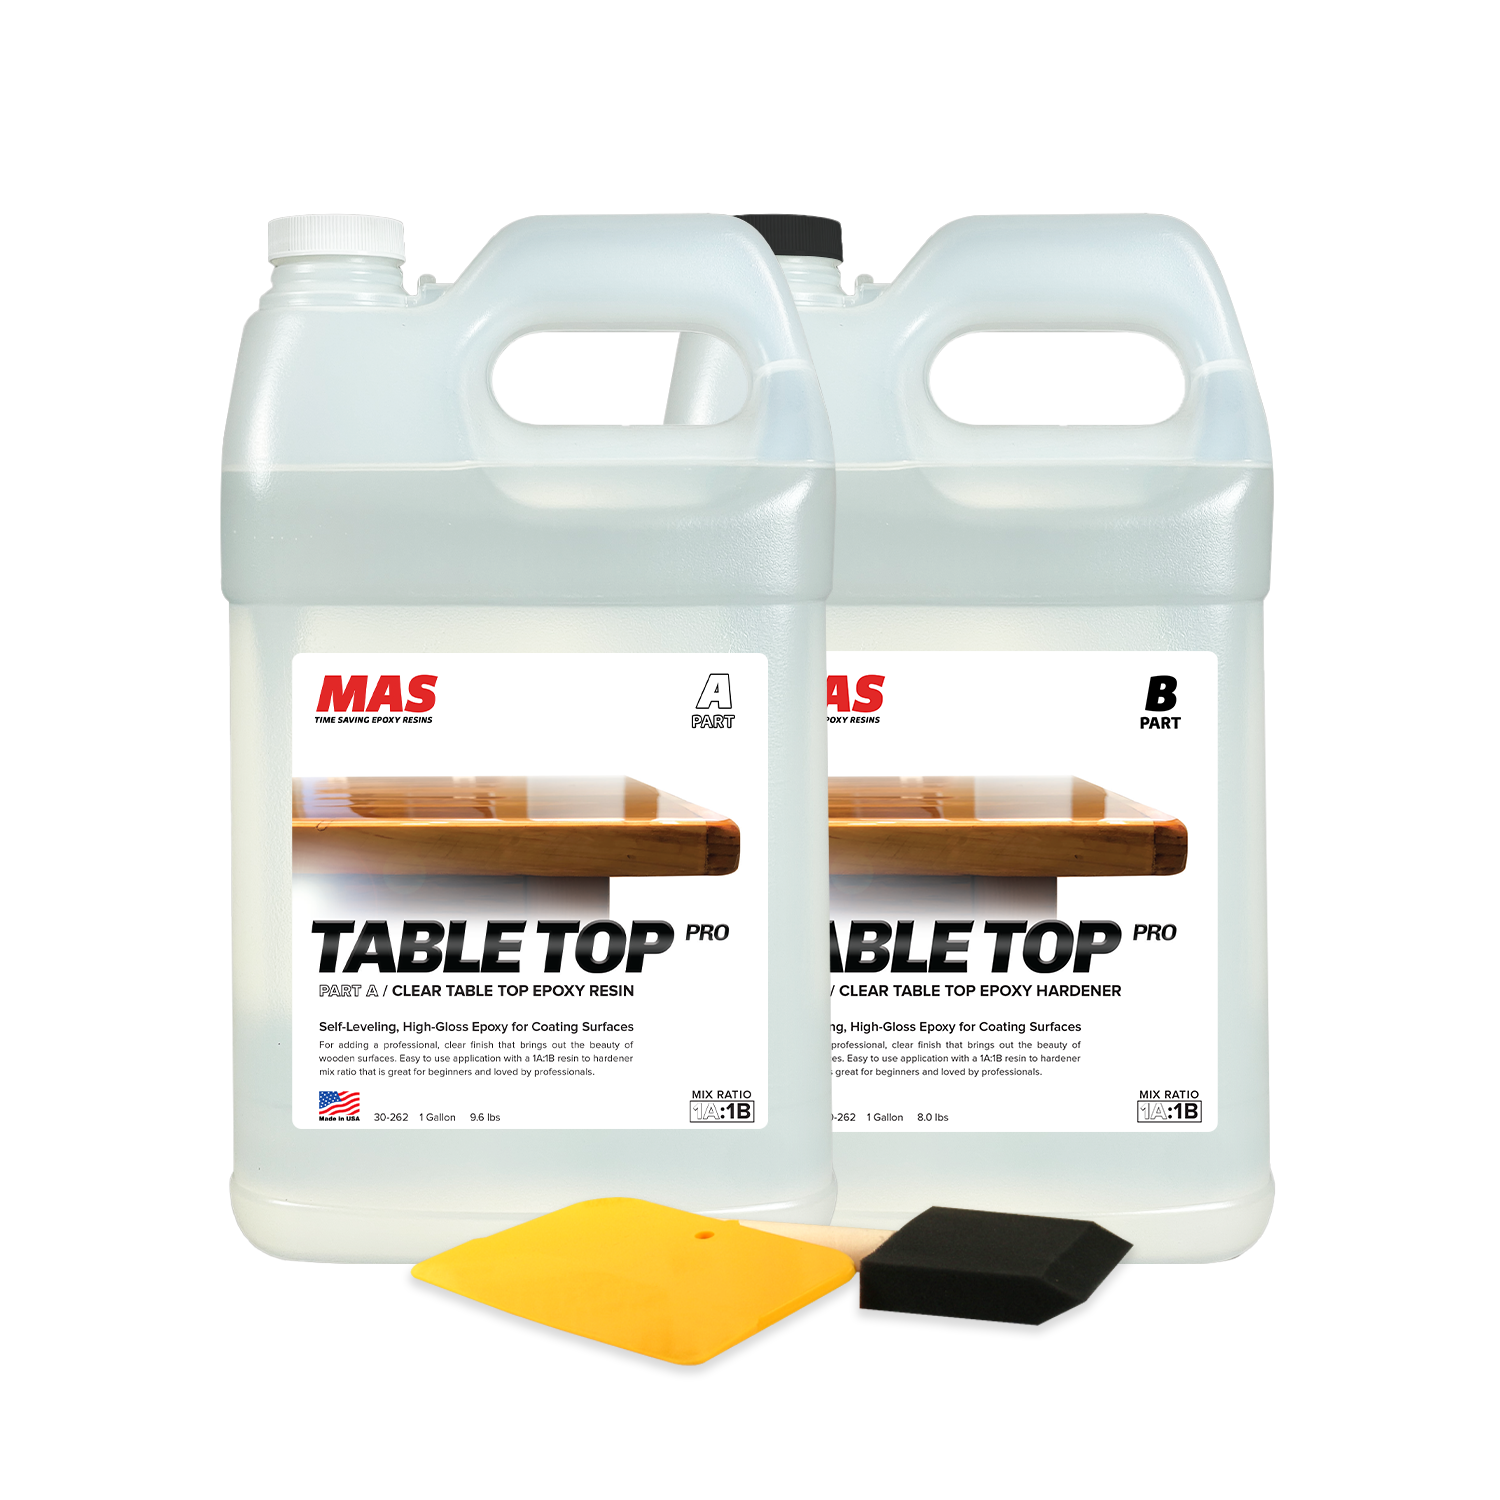 can i use Table Top Pro on my concrete counters?